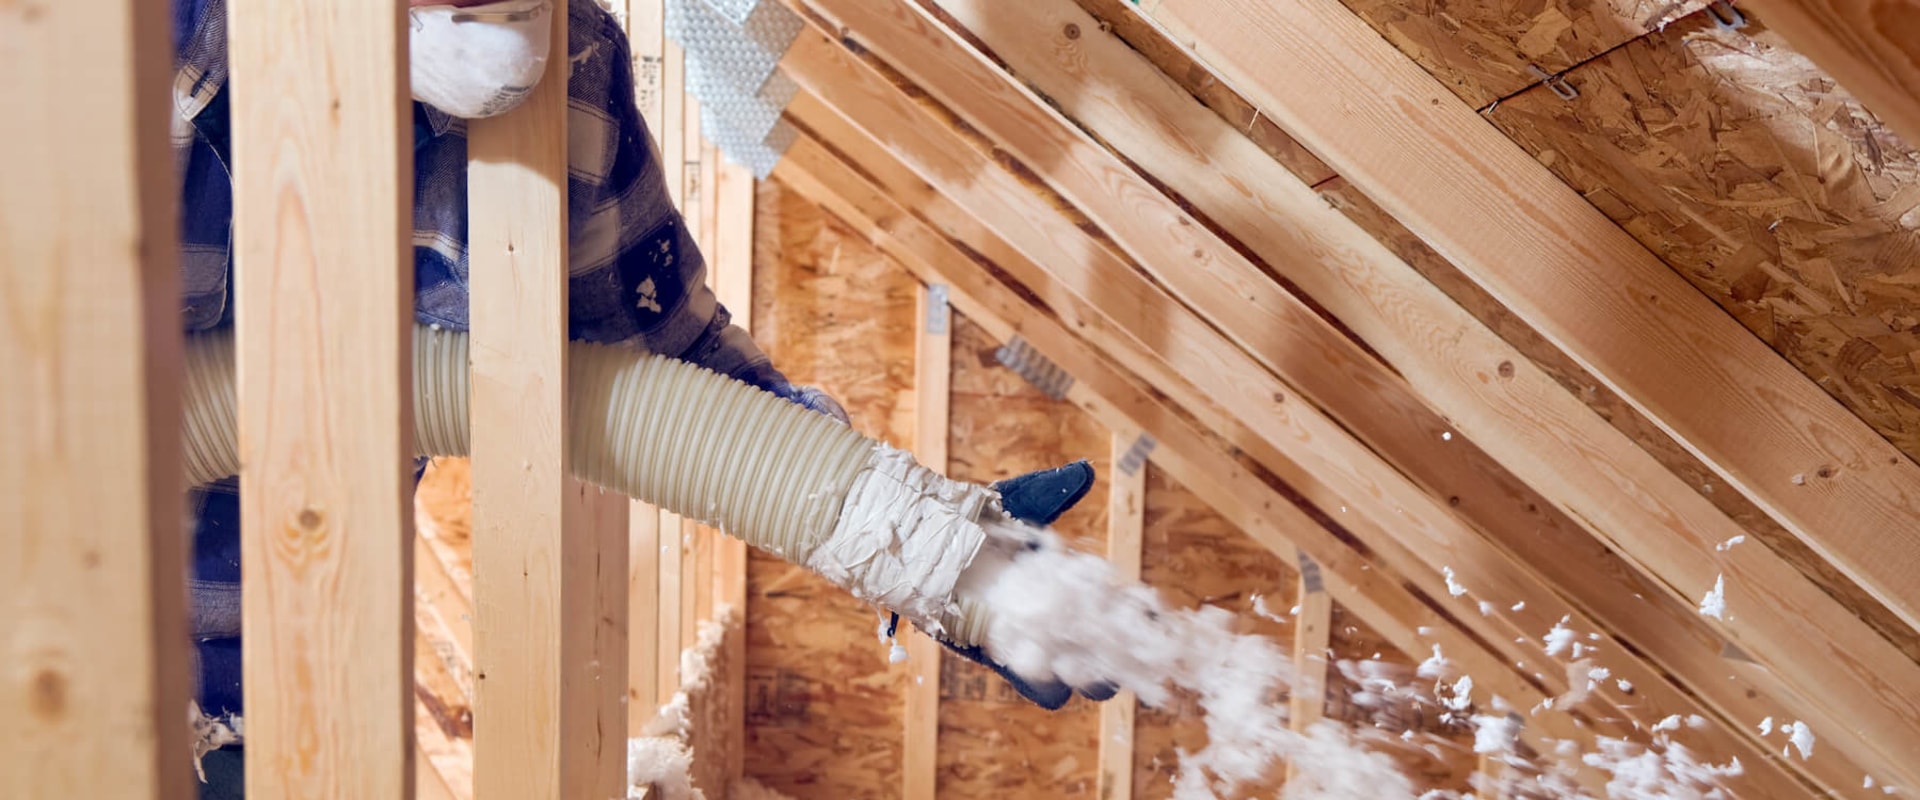 Insulating an Attic in Florida: The Best Options for a Hot and Humid Climate